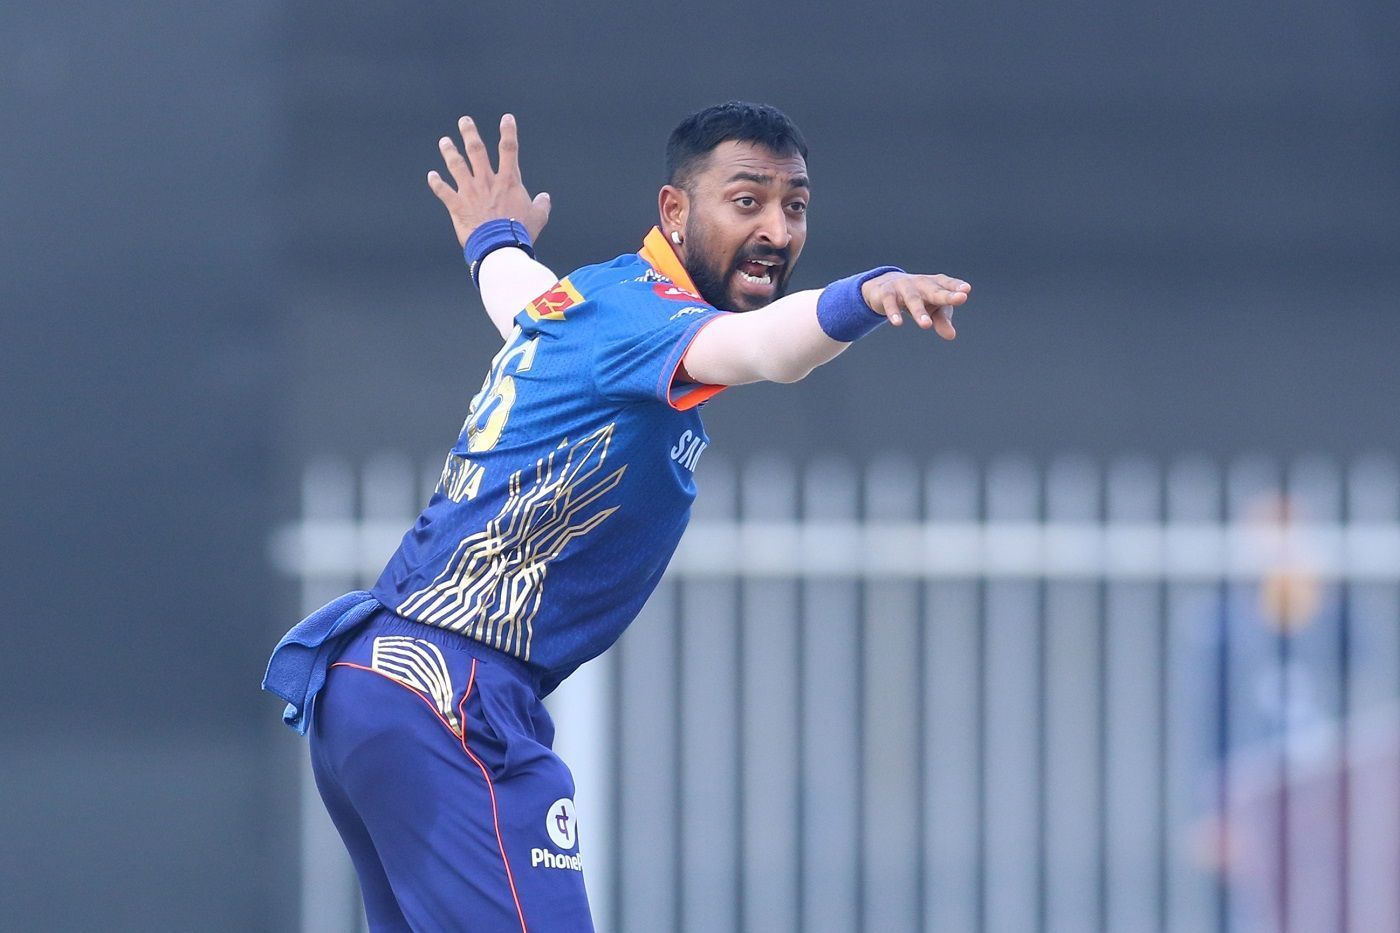 Krunal Pandya was released by Mumbai Indians ahead of IPL 2022 auctions (Credit: BCCI/IPL)